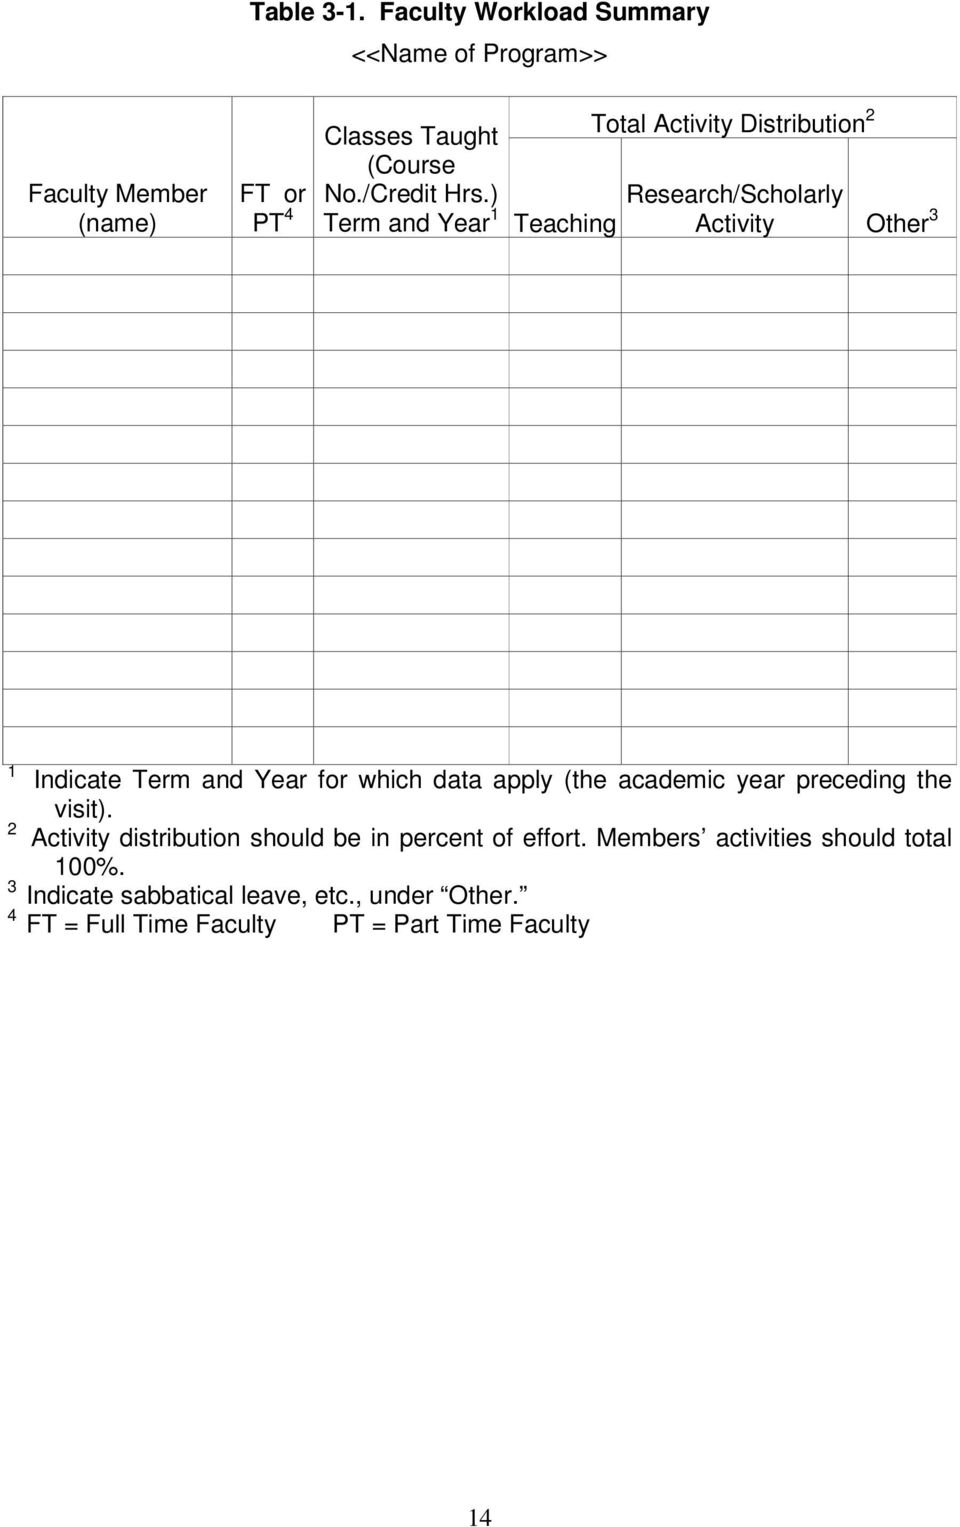 ) Term and Year 1 Teaching Total Activity Distribution 2 Research/Scholarly Activity Other 3 1 Indicate Term and Year for